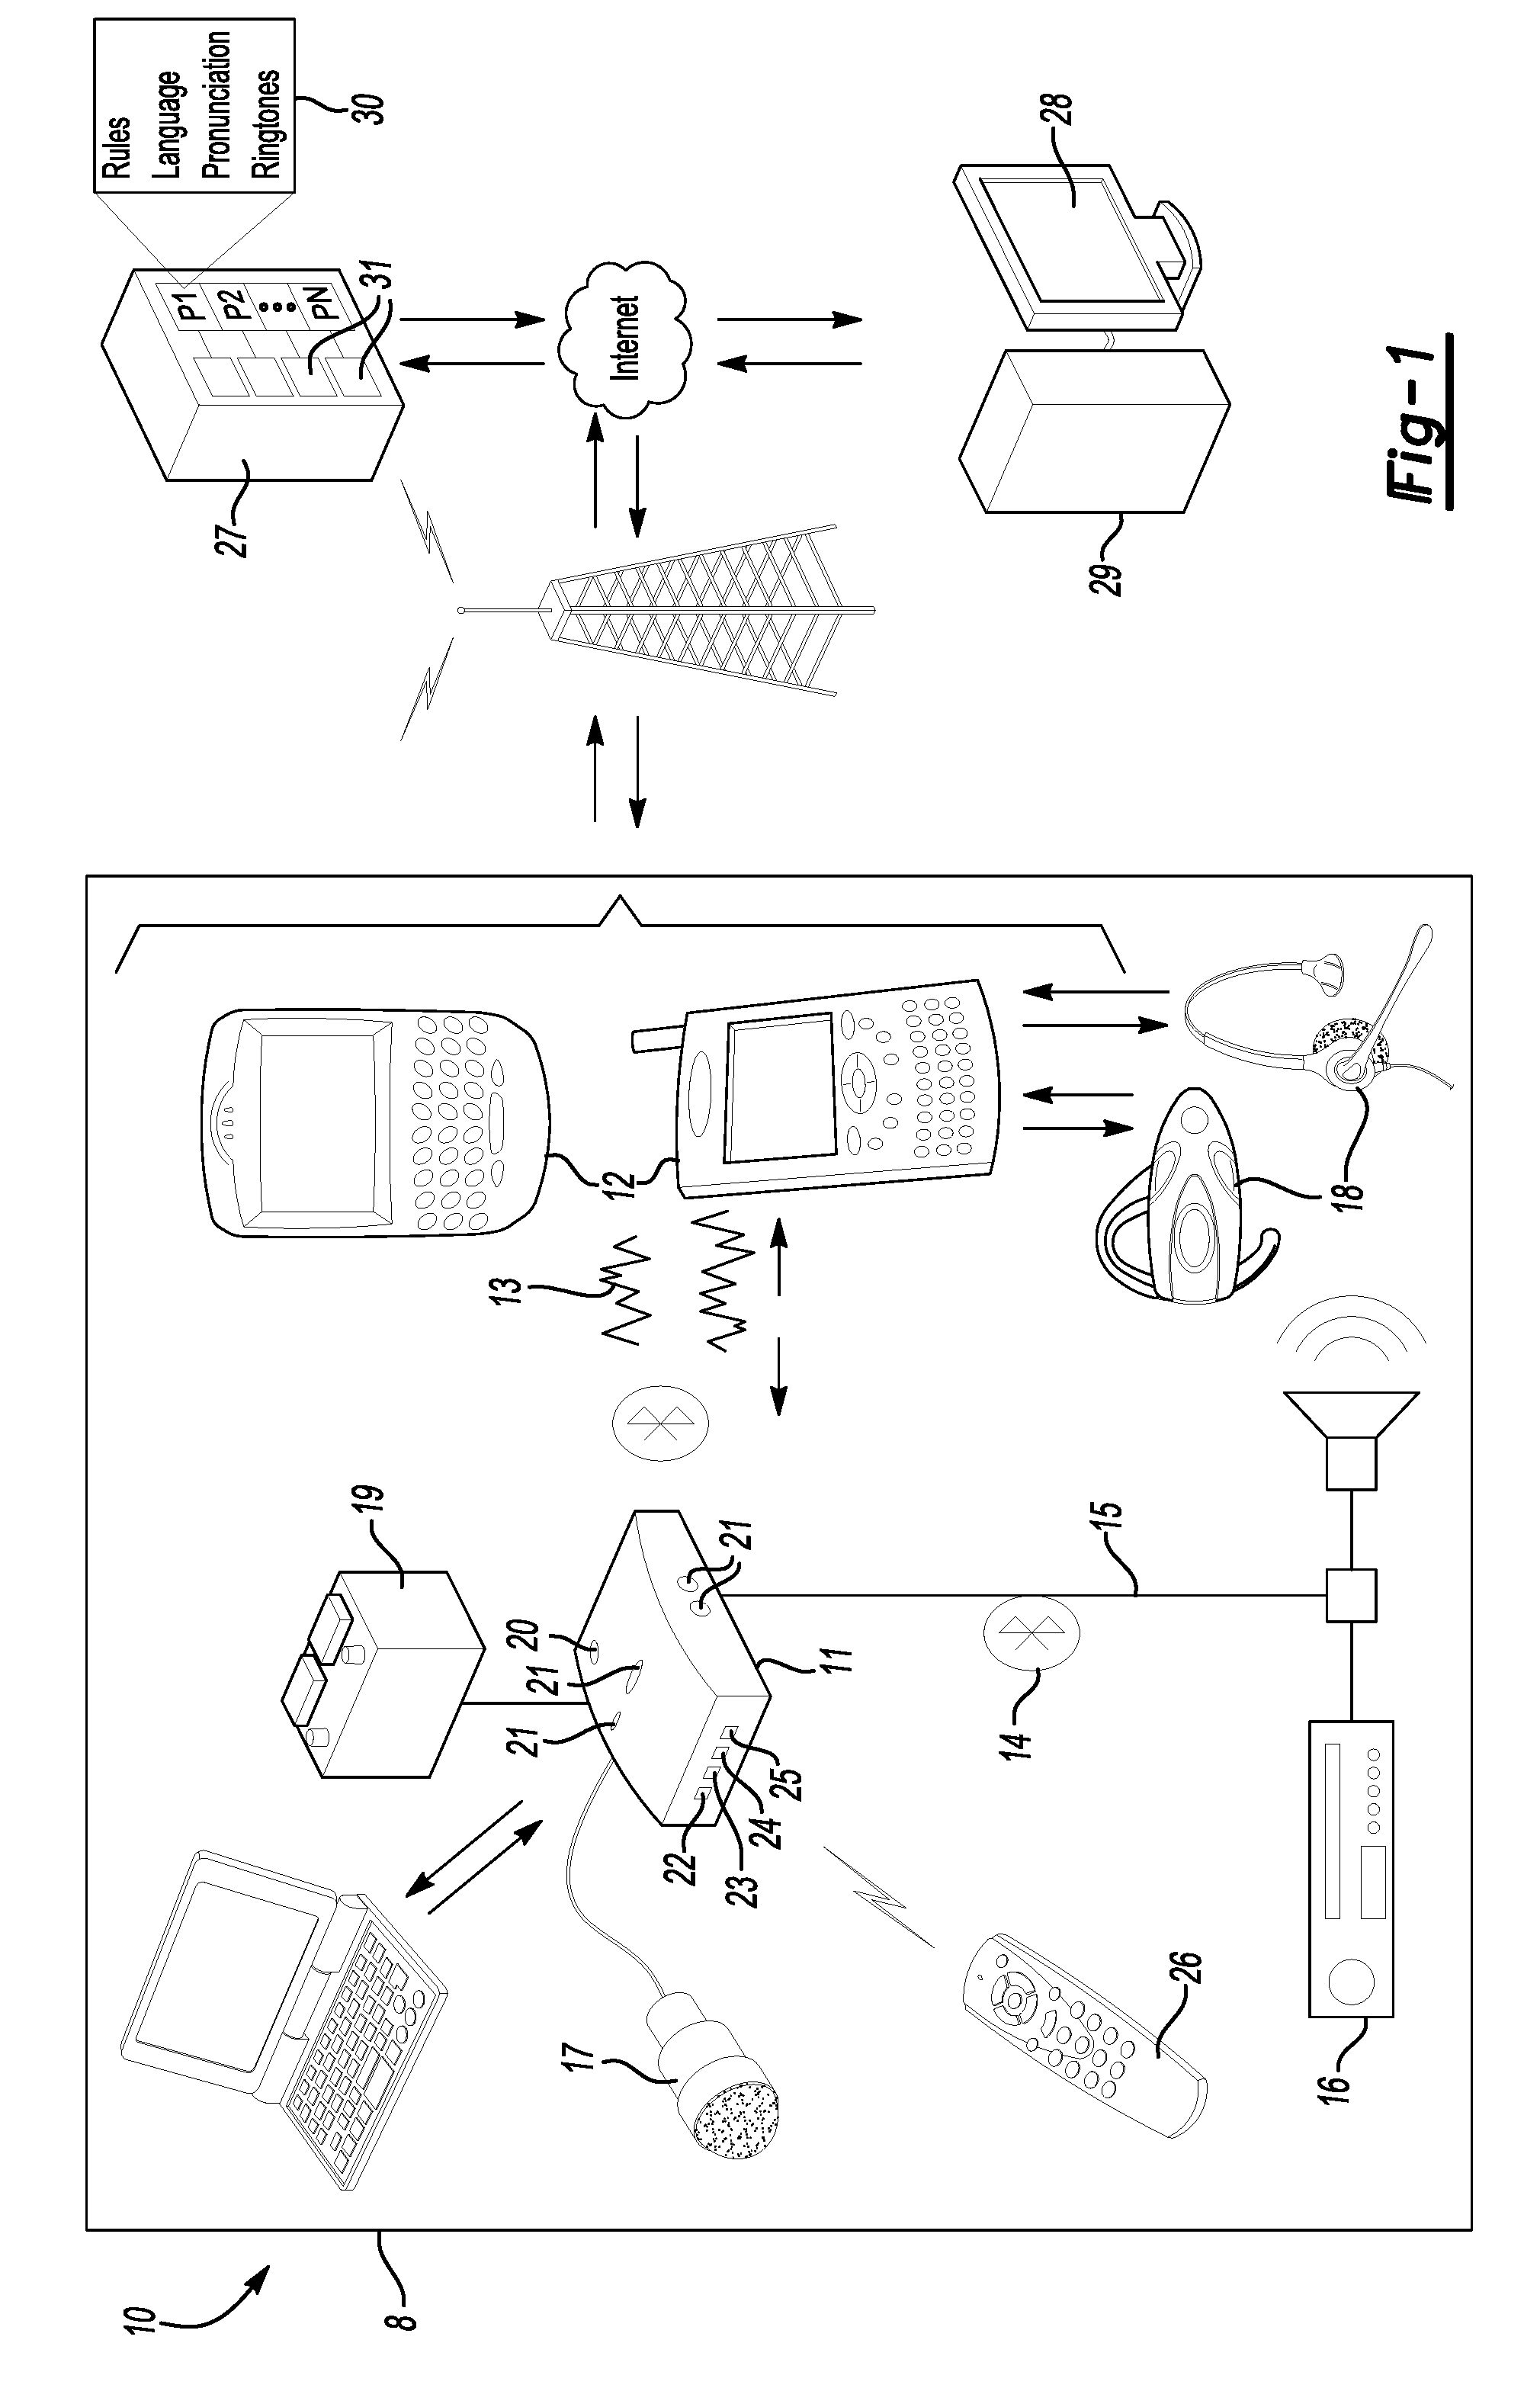 Vehicle communication system with destination selection for navigation